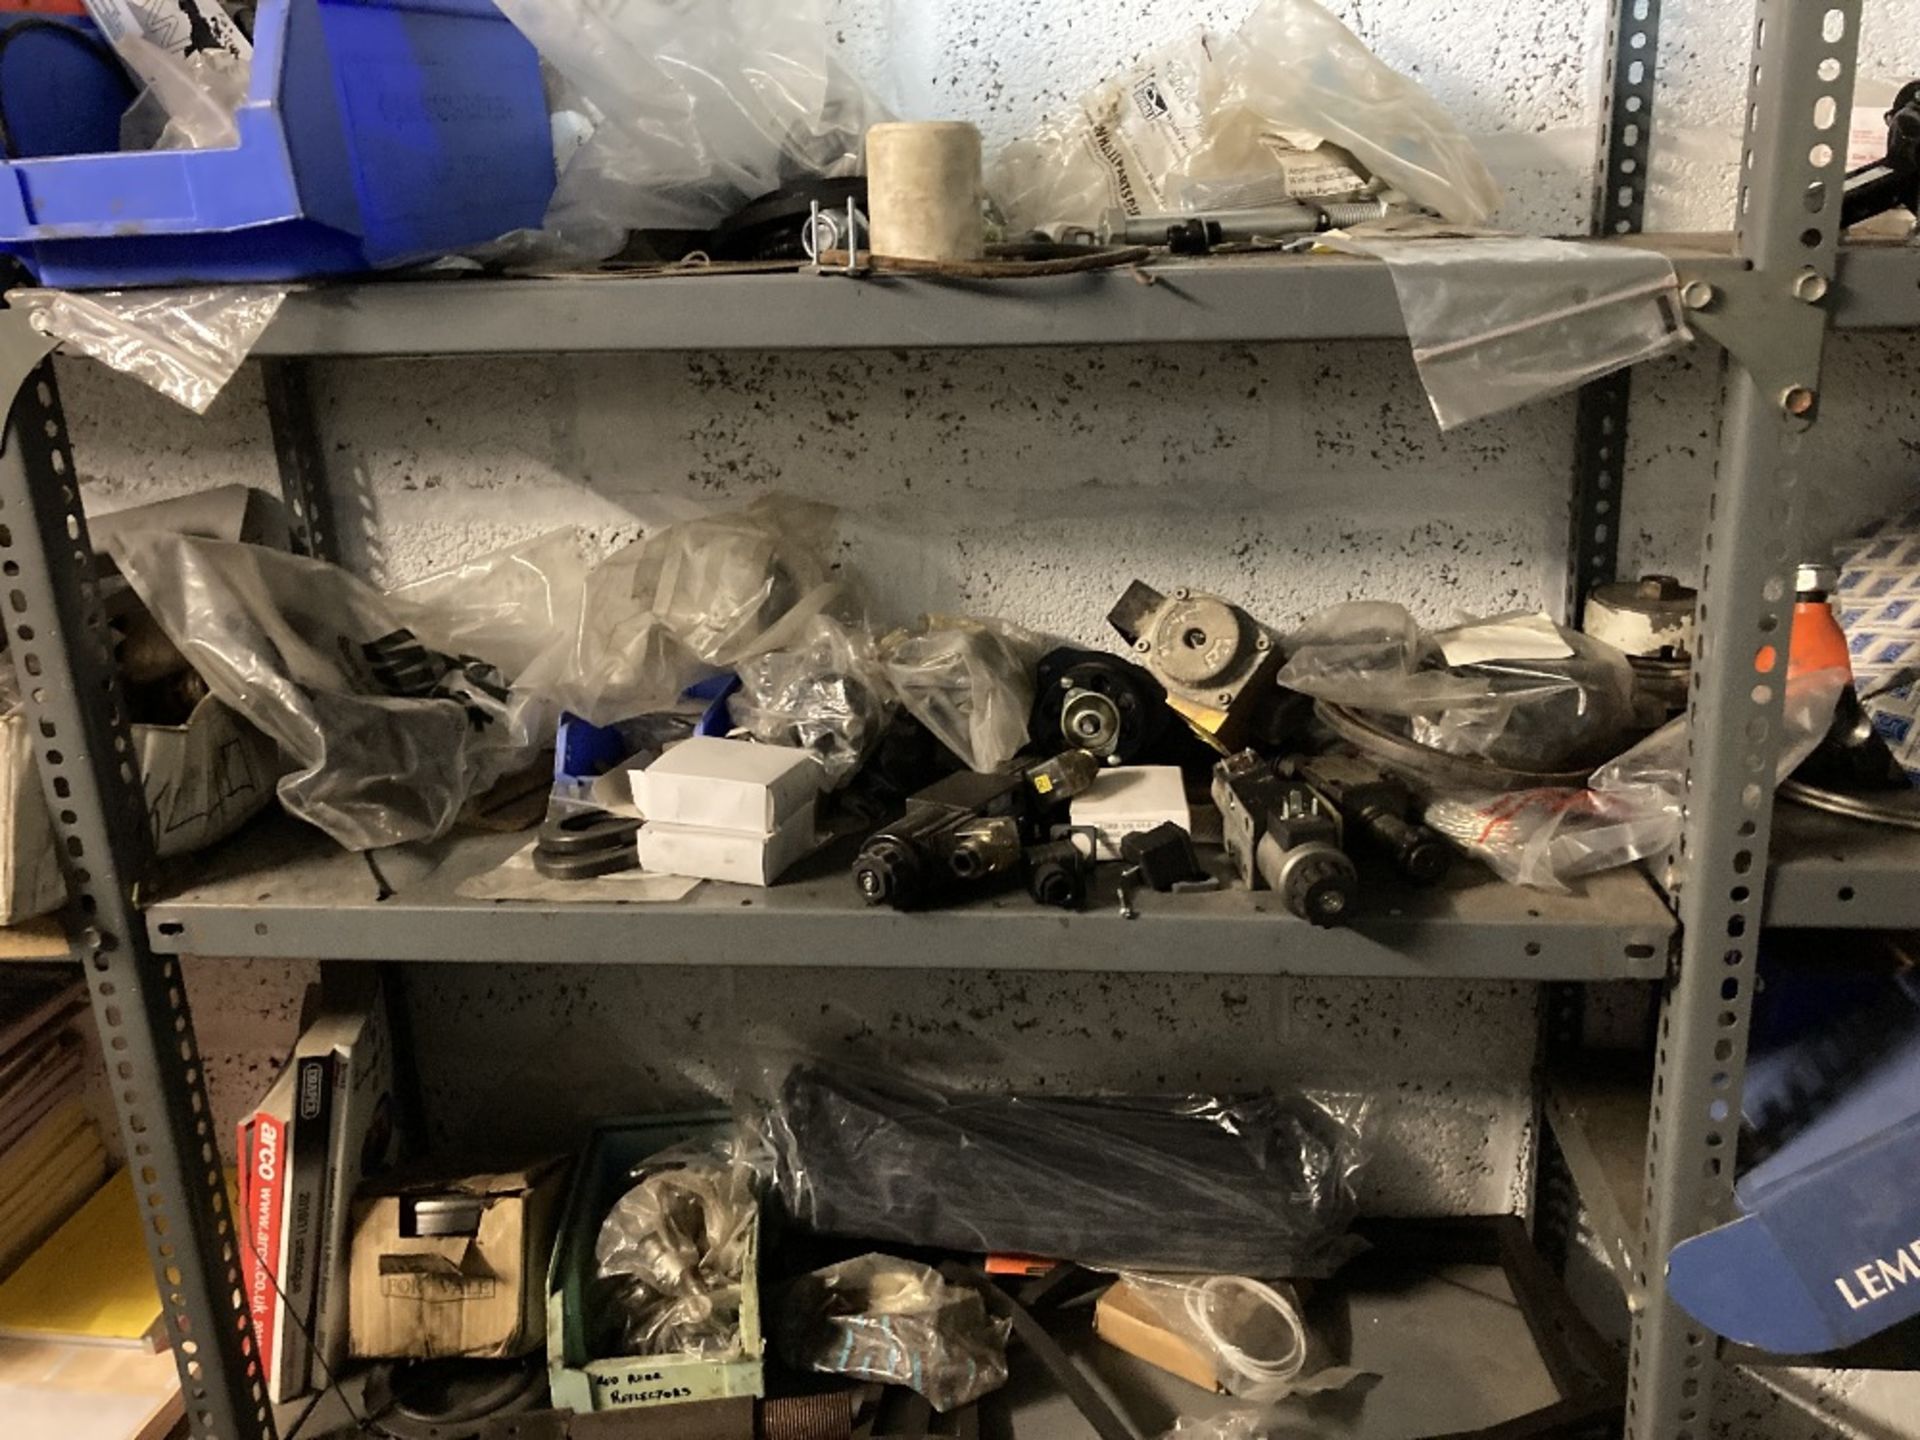 Content of Parts Room Containing Large Quantity of Various Parts & Components - Image 18 of 150